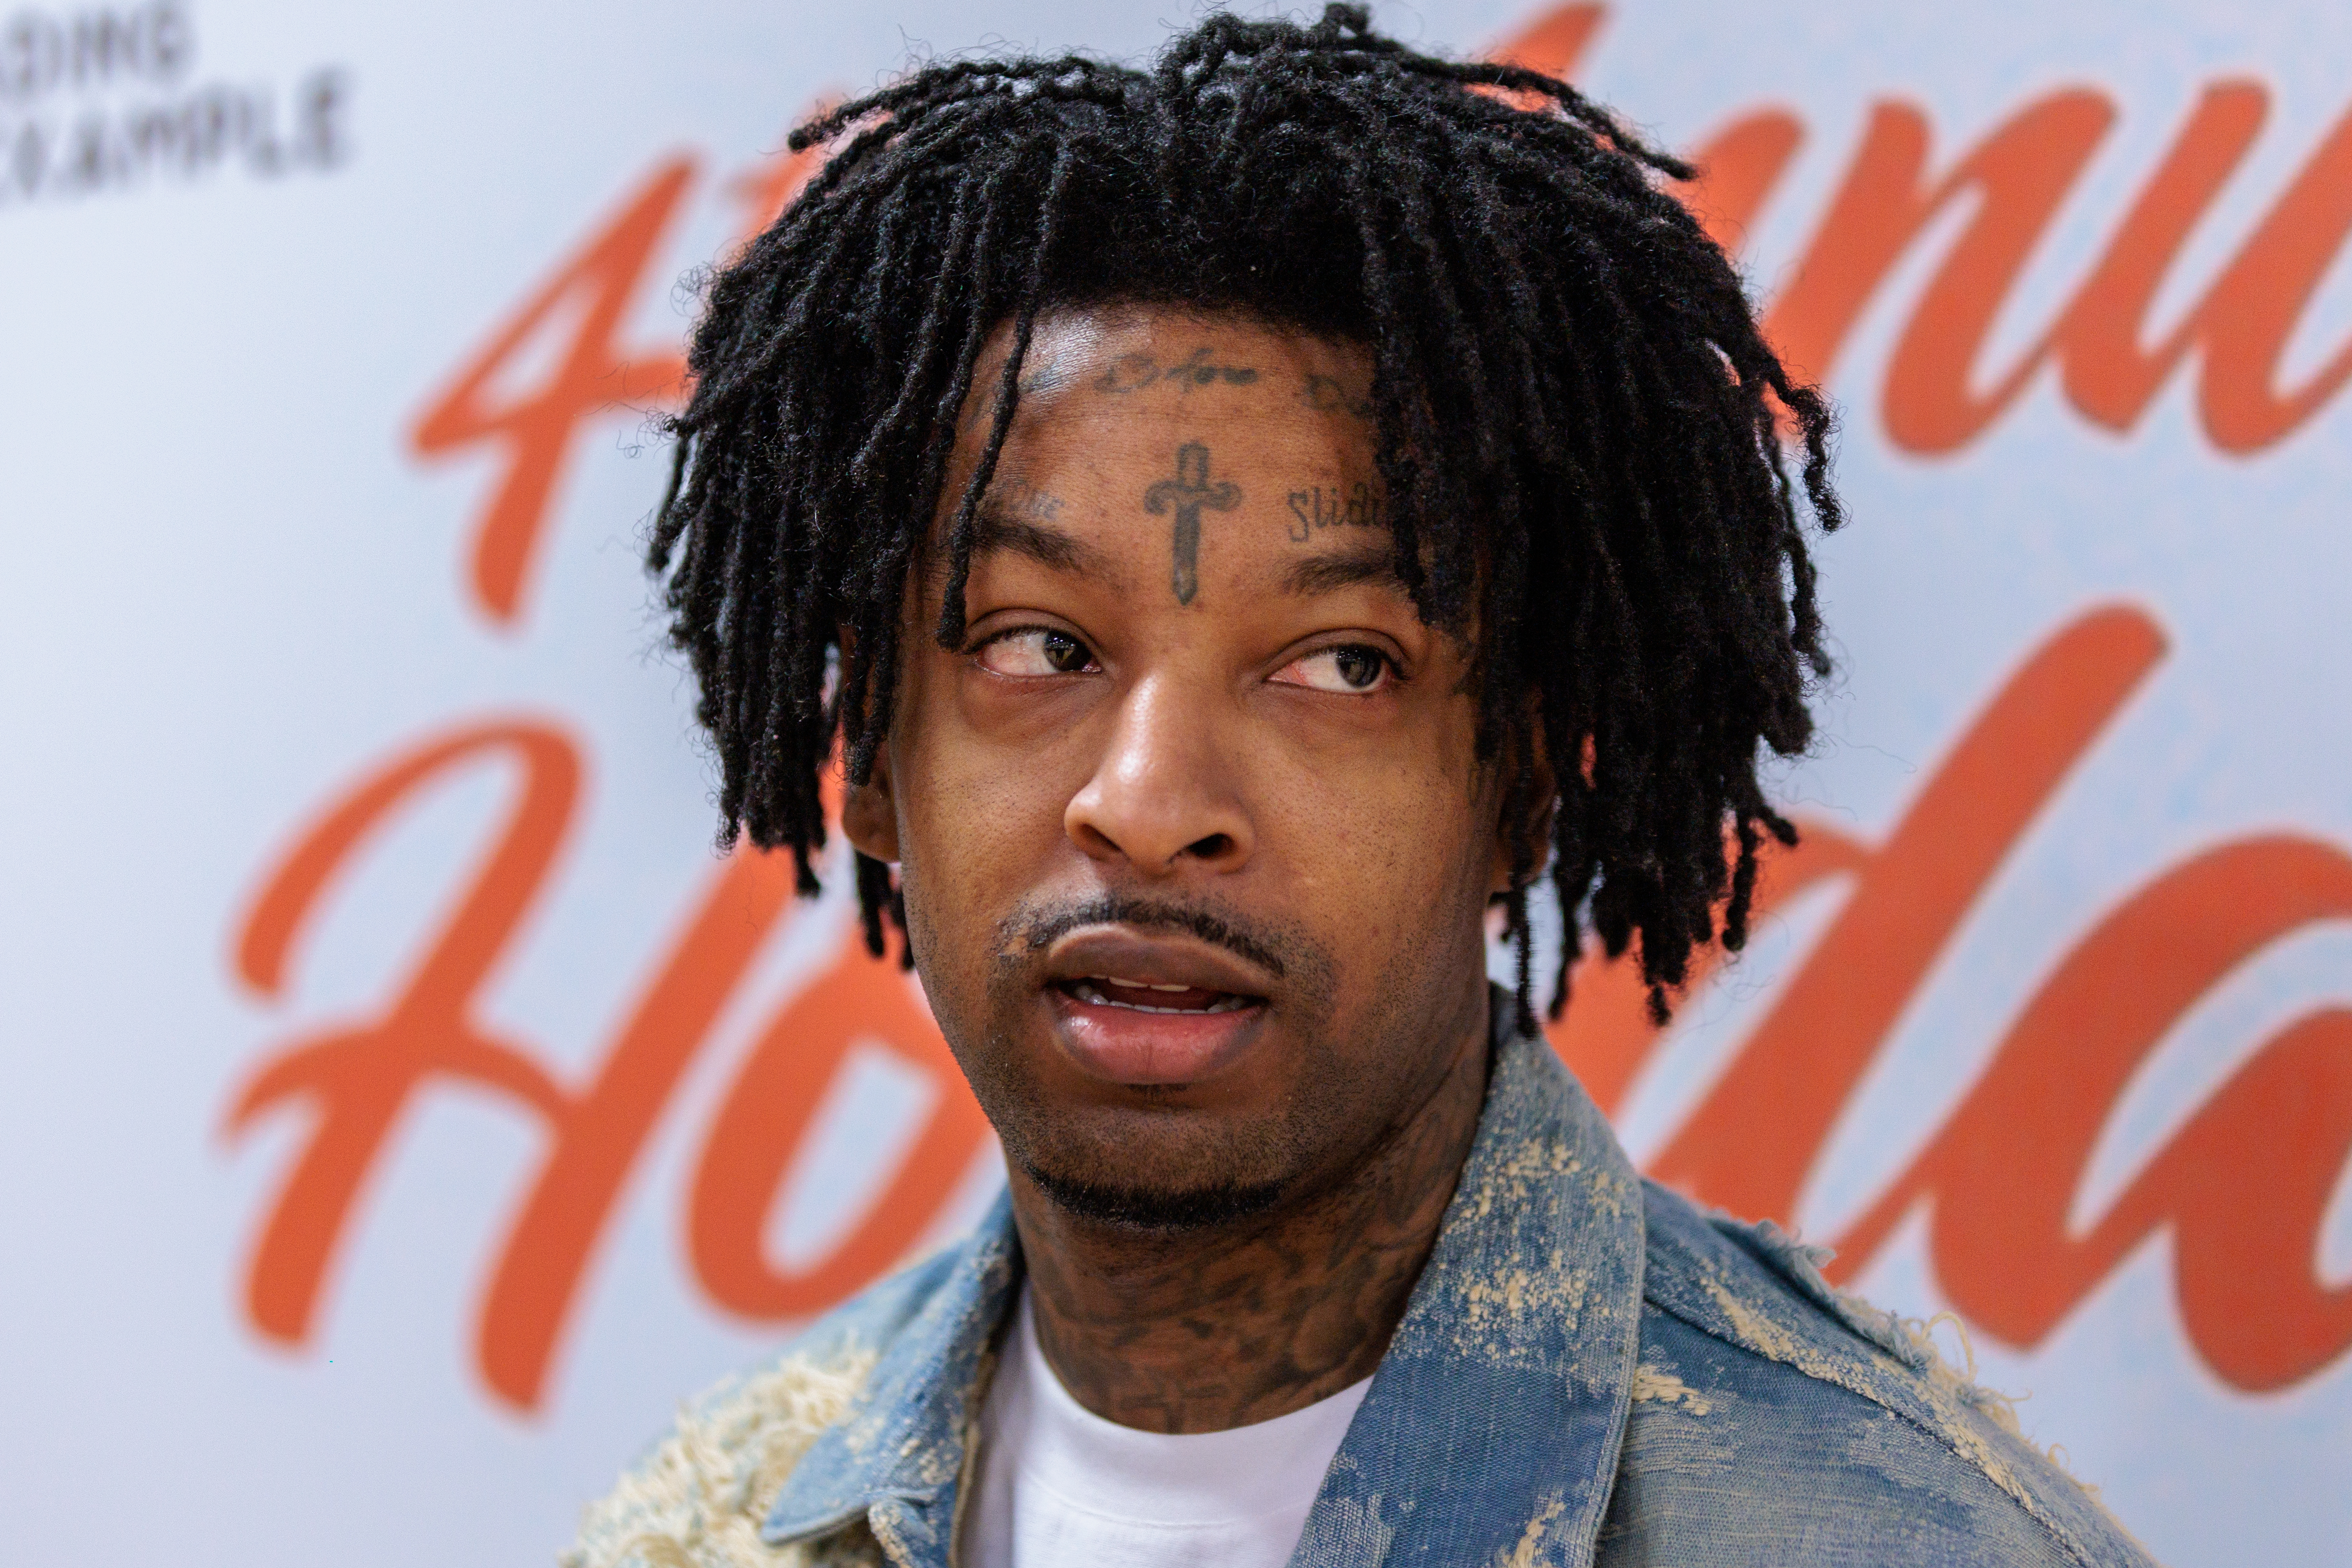 Grammy-winning rapper 21 Savage gets official day in Georgia